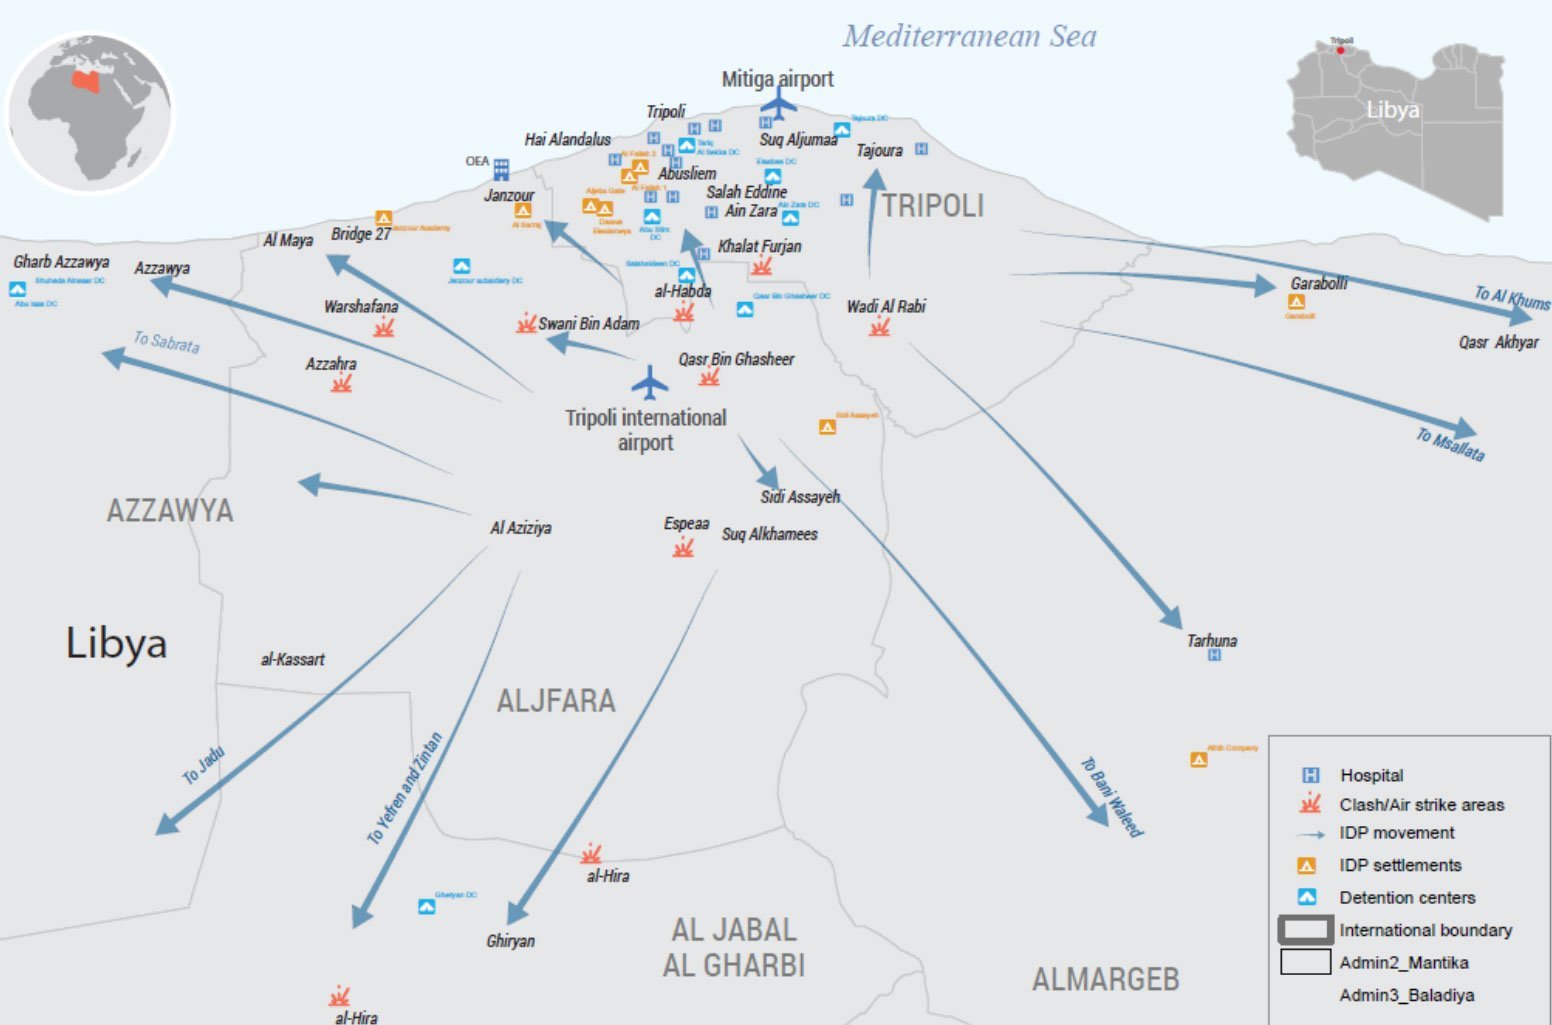 UN Office for the Coordination of Humanitarian Affairs on Libya: Tripoli Clashes as of 16 April 2019. 